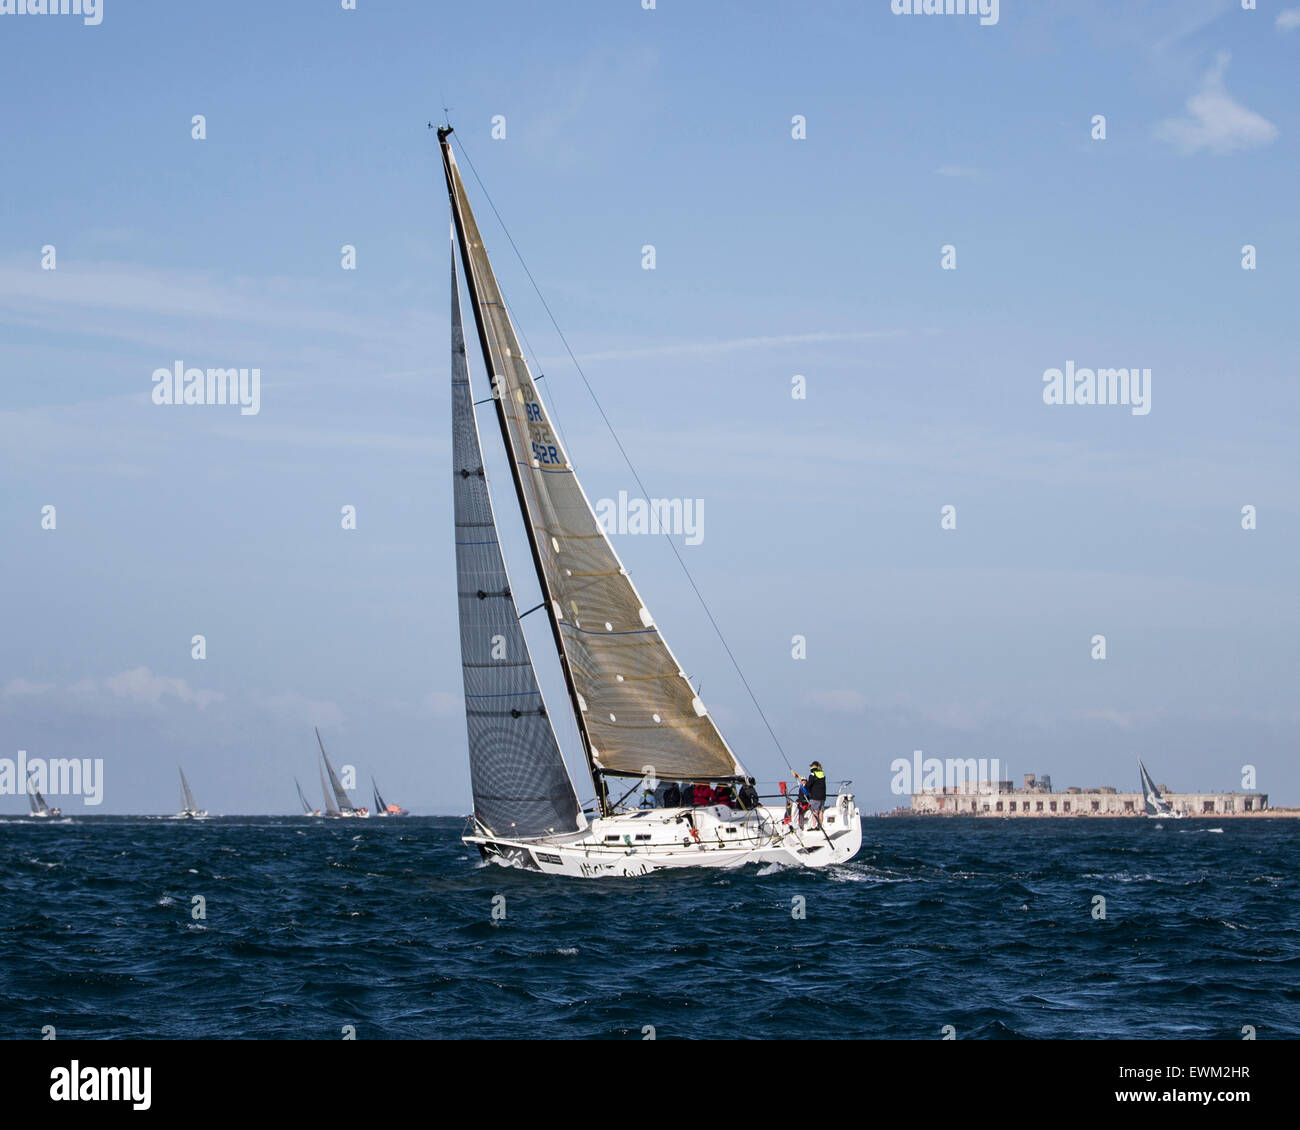 UK. 27th June, 2015. GBR 562R taking part in the 2015 Round the Island Race Credit:  Niall Ferguson/Alamy Live News Stock Photo